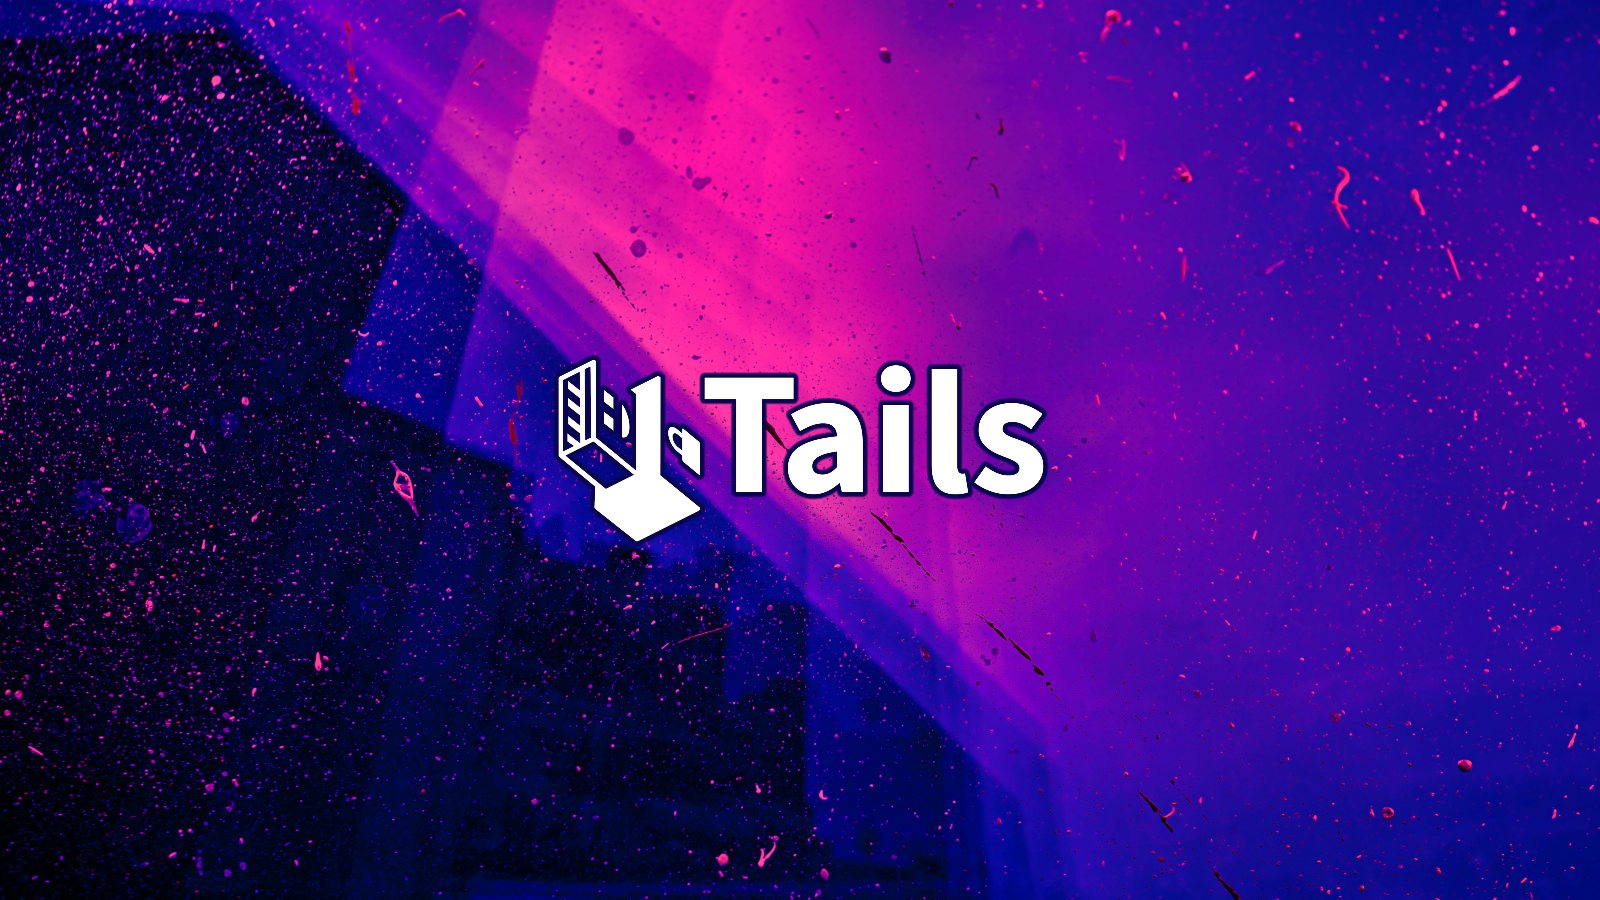 Tails 5.0 Linux users warned against using it "for sensitive